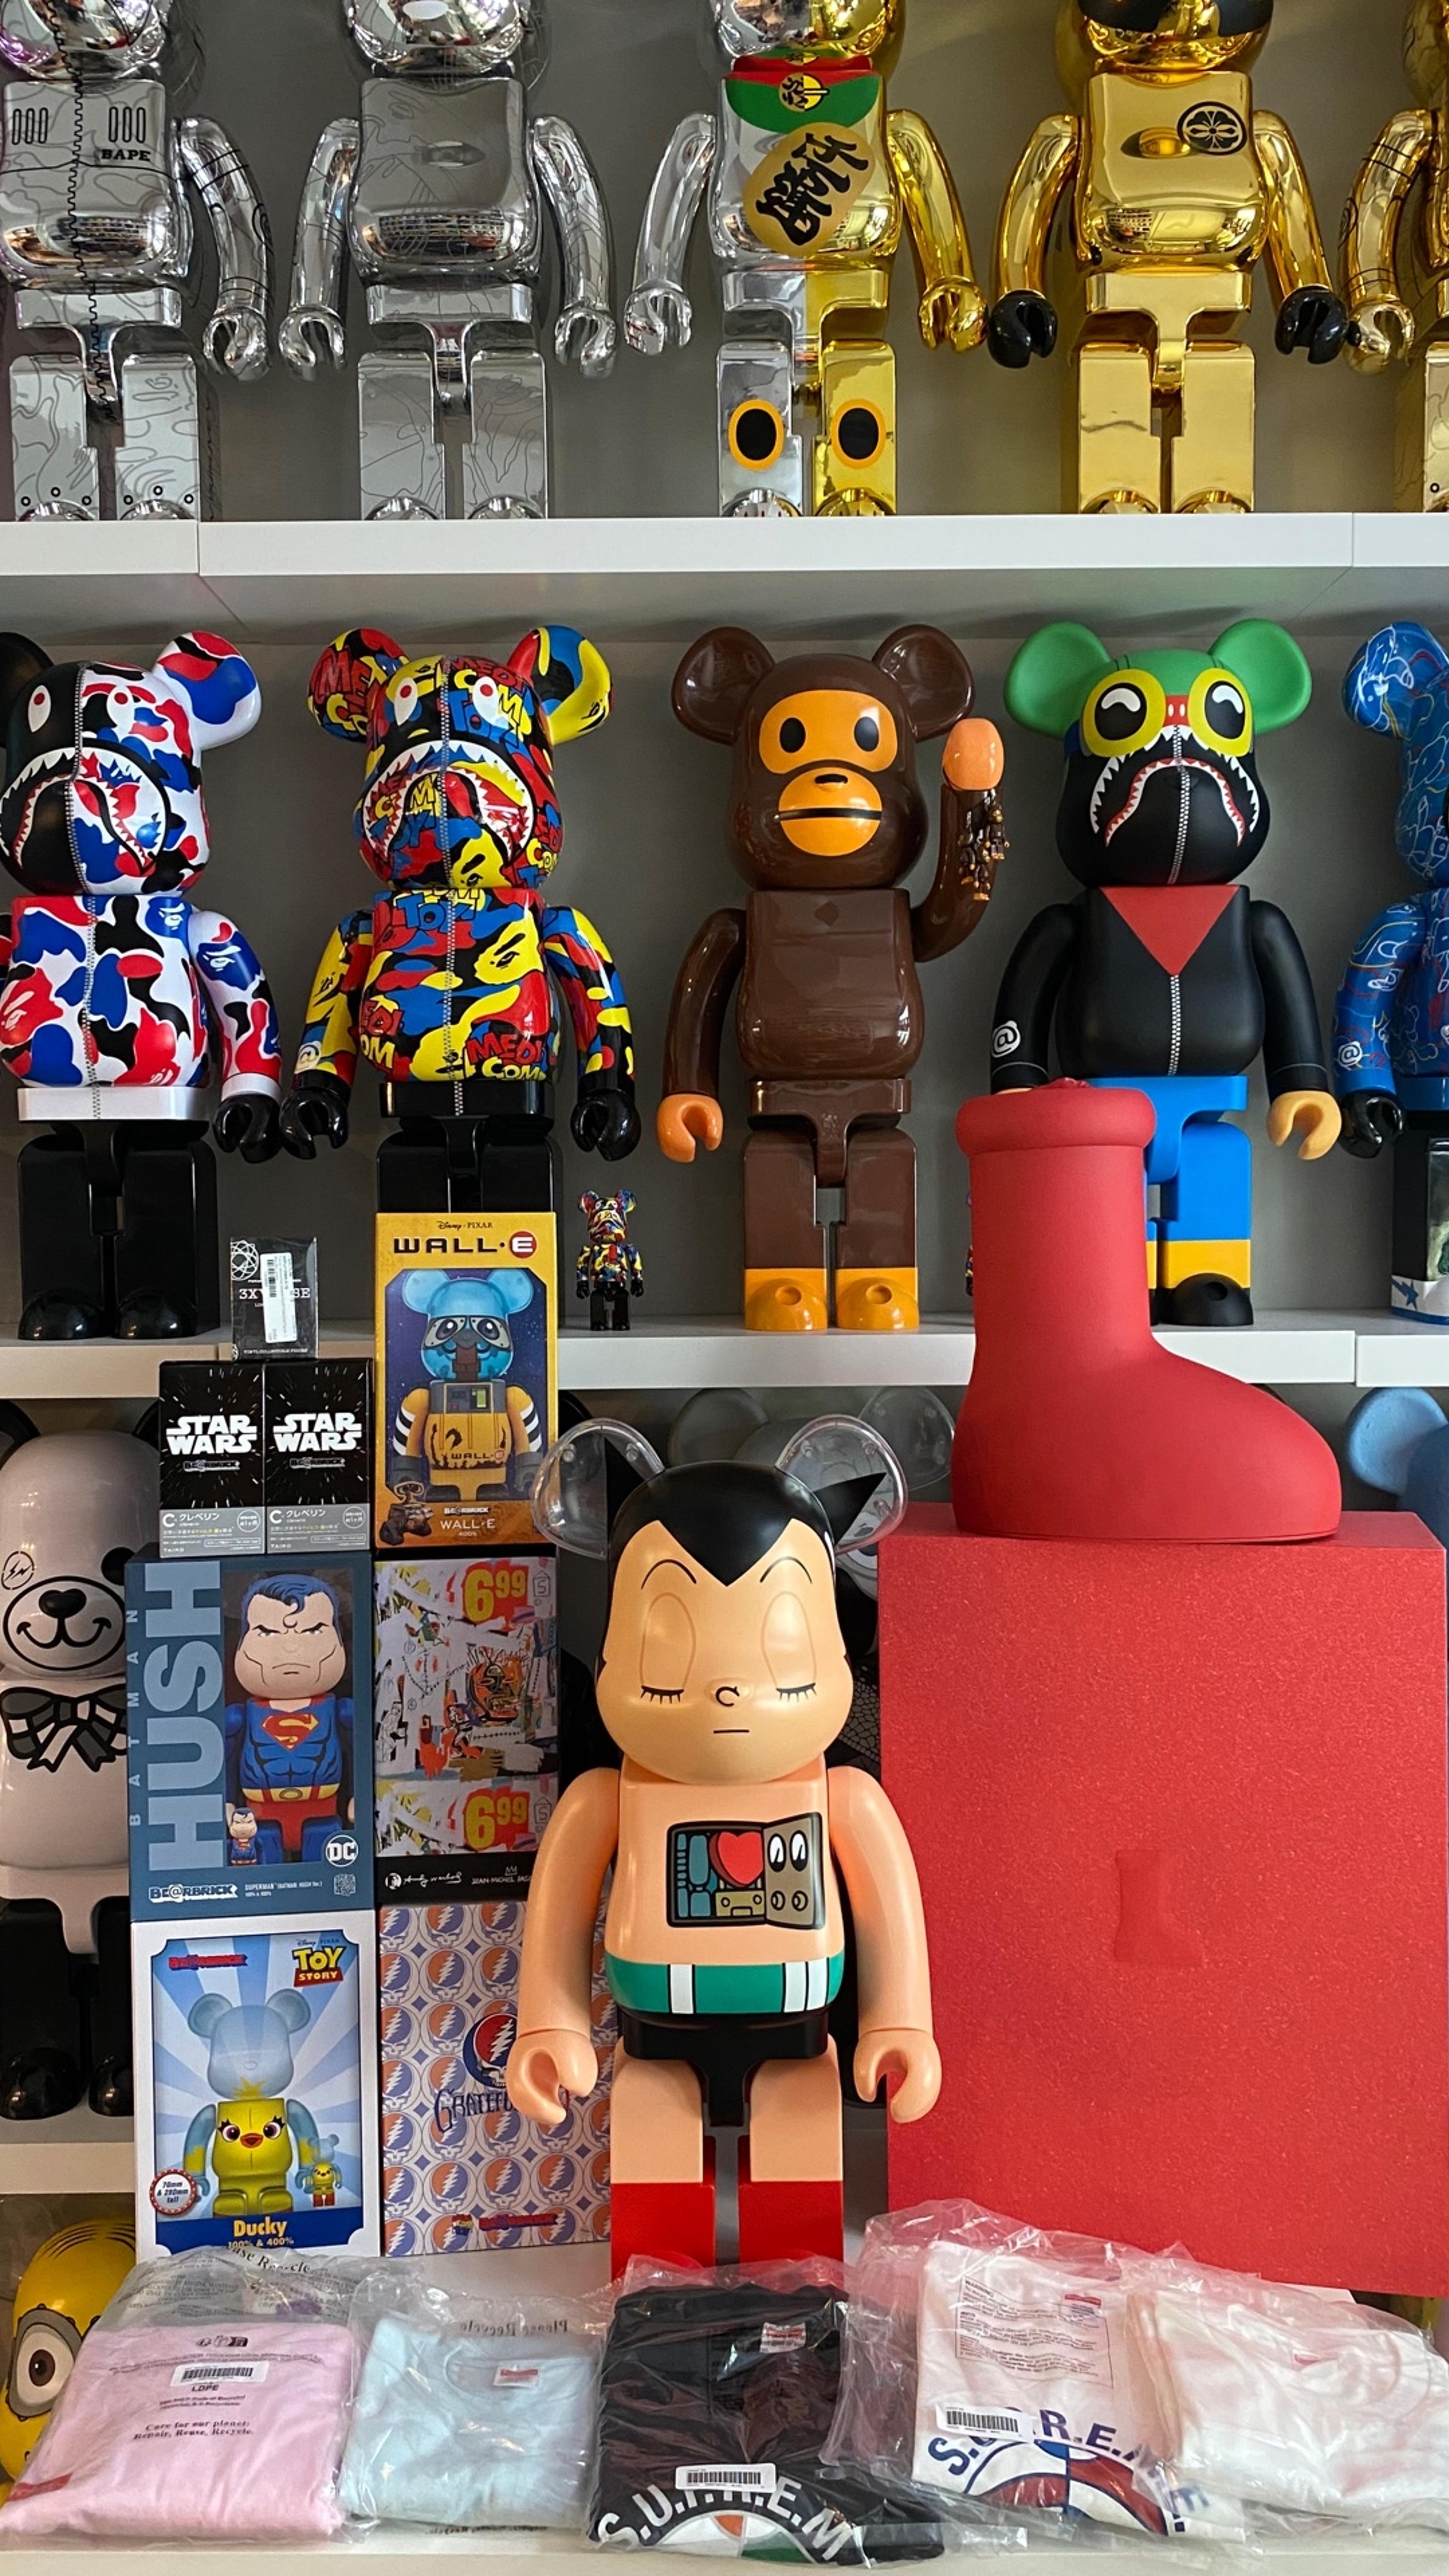 Preview image for the show titled "1$ SUPREME BE@RBRICKS GUMBALL" at Today @ 11:00 PM